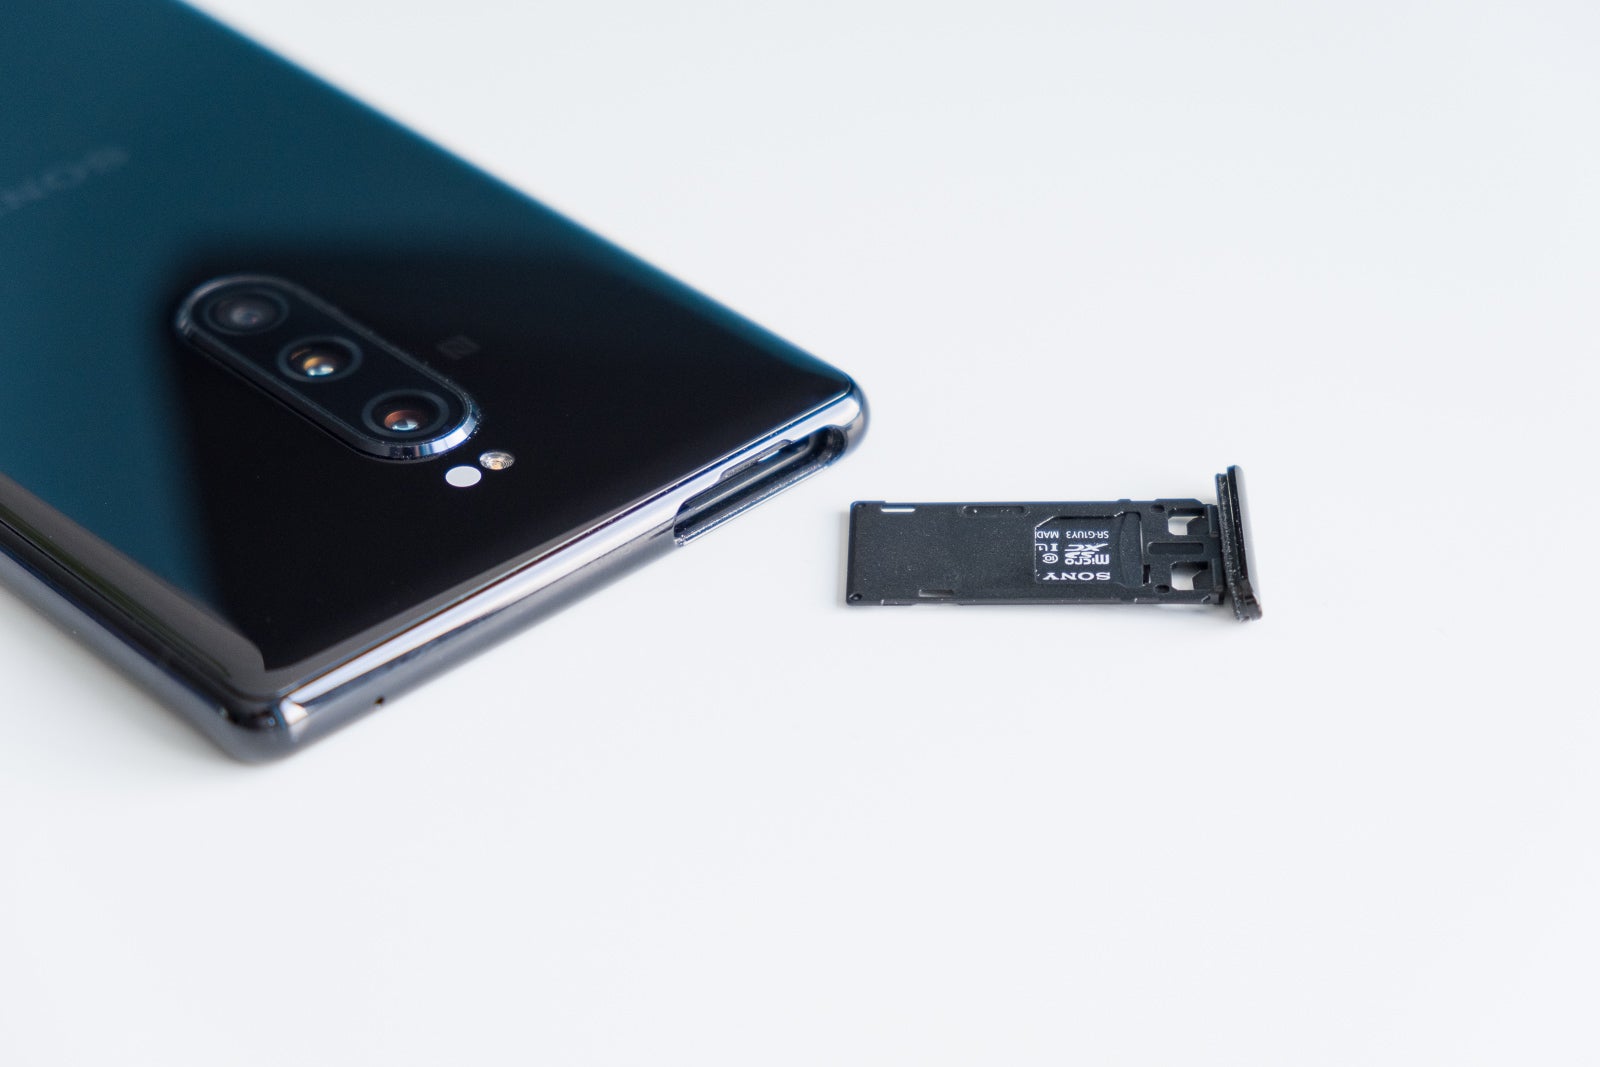 Sony Xperia 1 Q&amp;A: Your questions answered